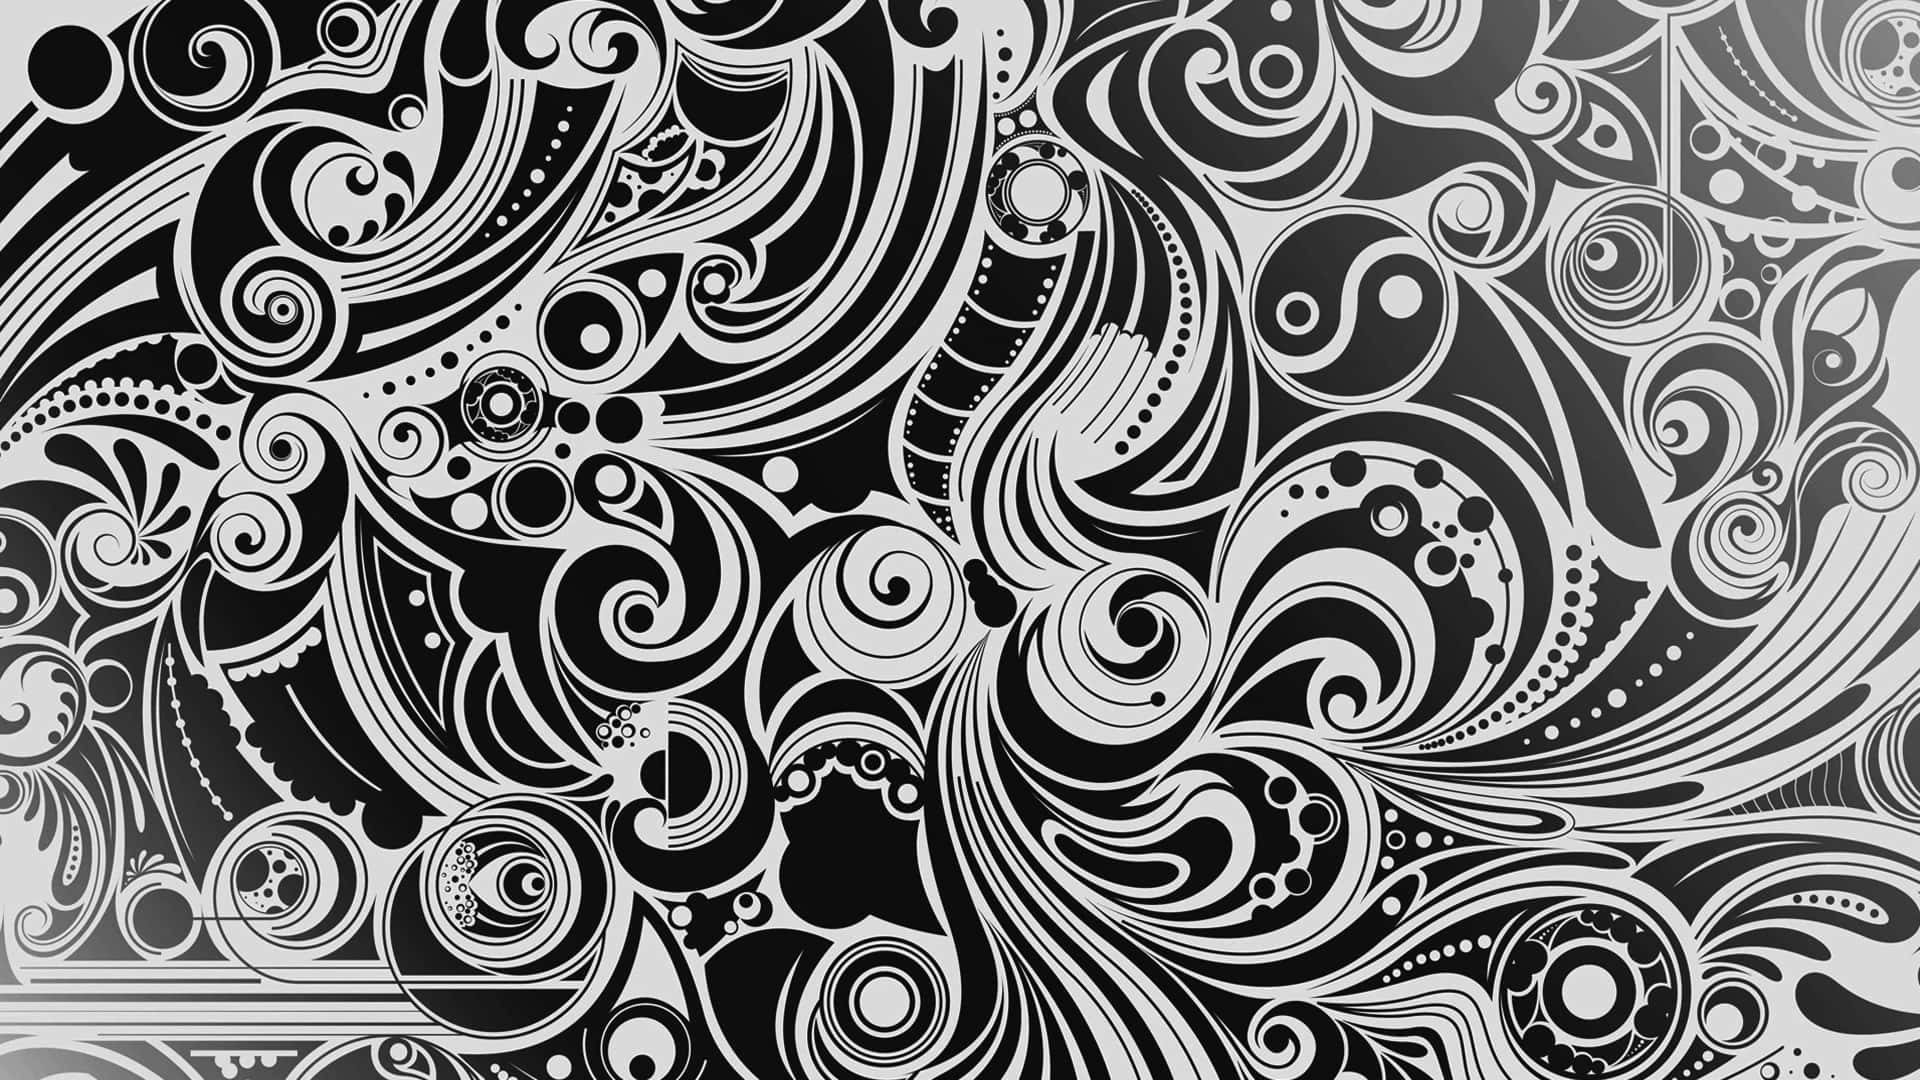 Stunning black and white abstract pattern. Wallpaper